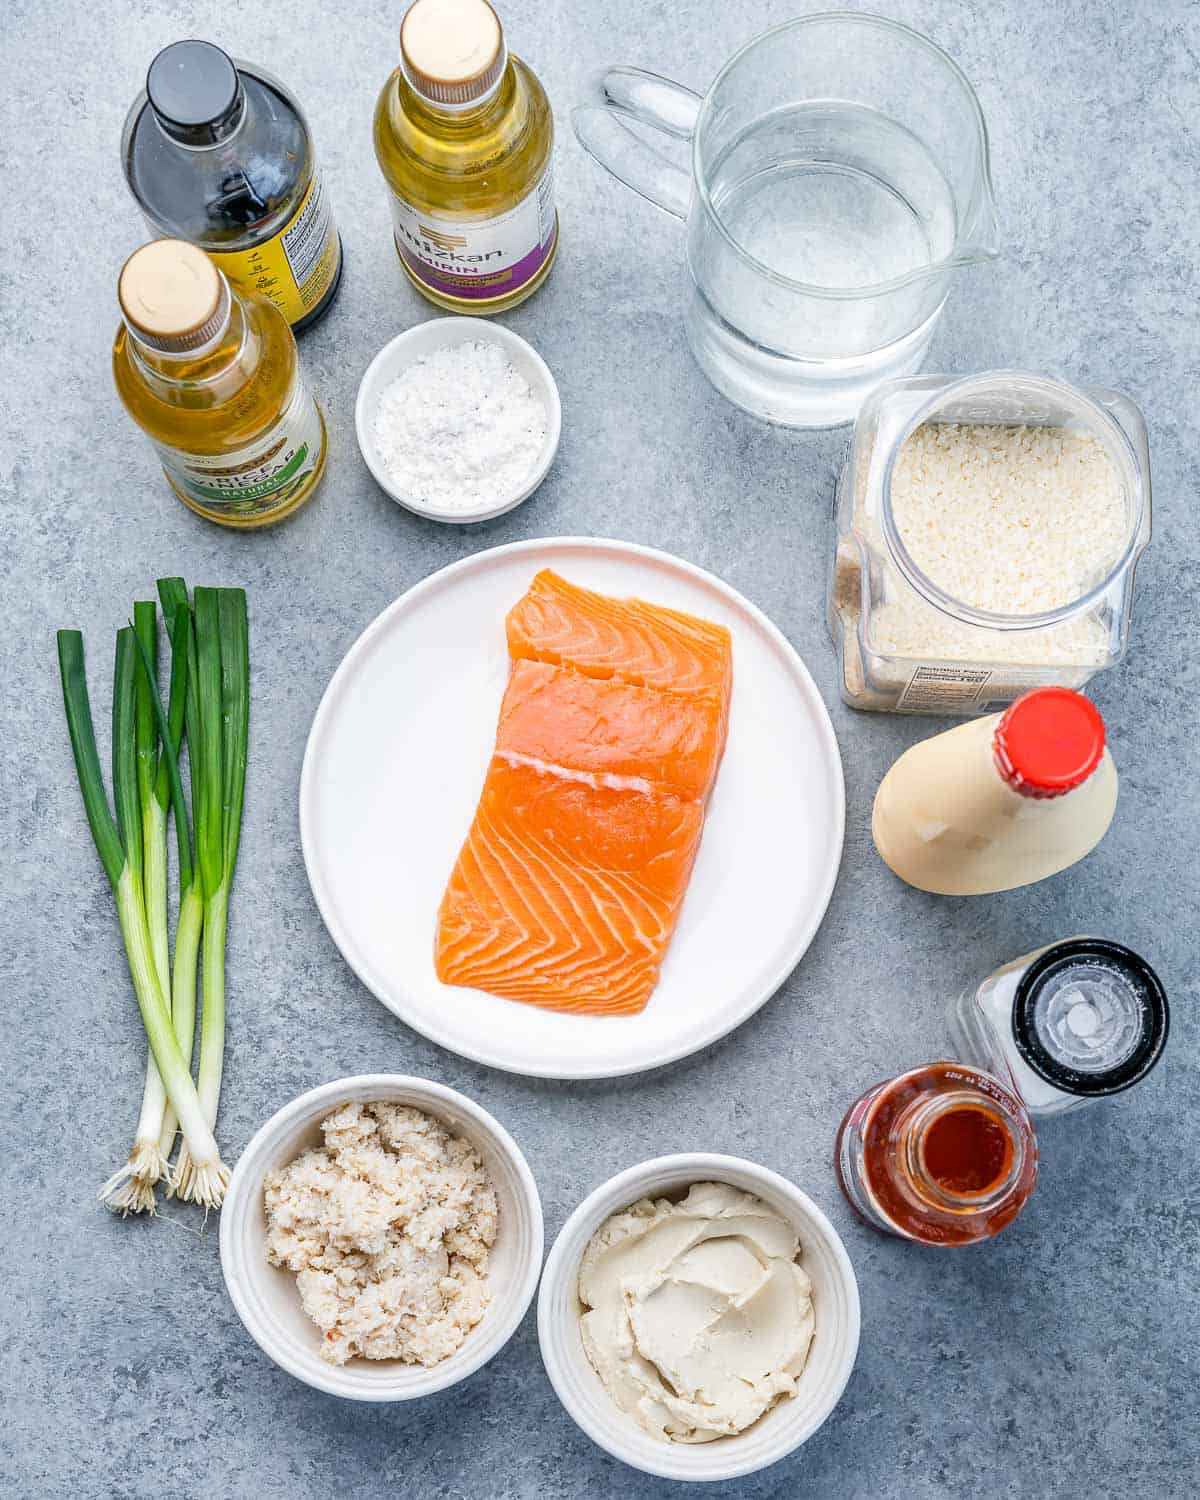 Raw salmon on a plate near green onions, bowls of mayo and cream cheese, and seasoning like rice vinegar, soy sauce and sriracha sauce.